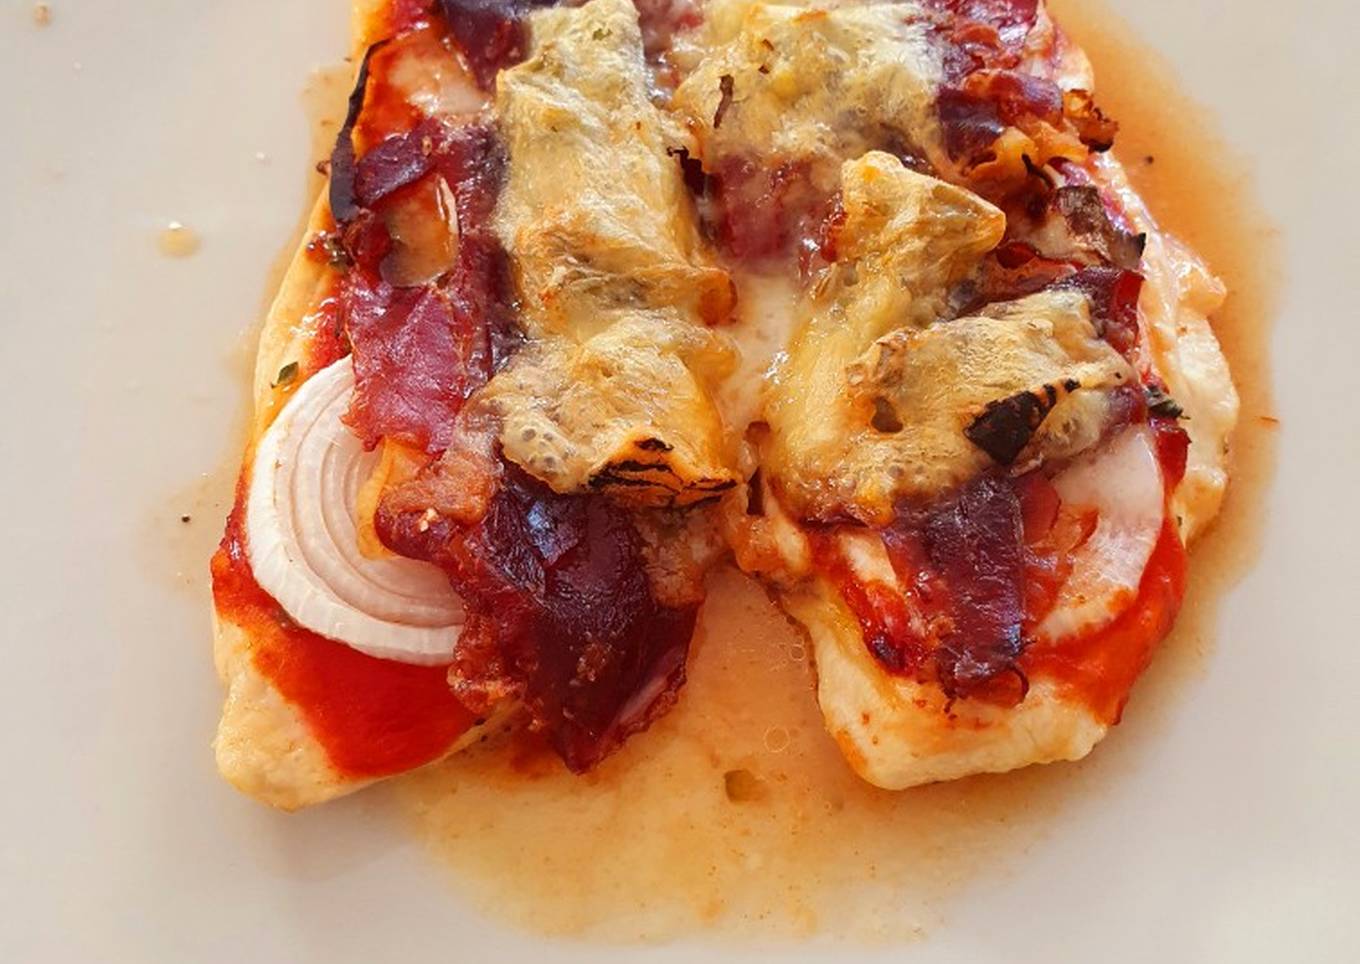 10 minute chicken pizza with jamon iberico and gorgonzola